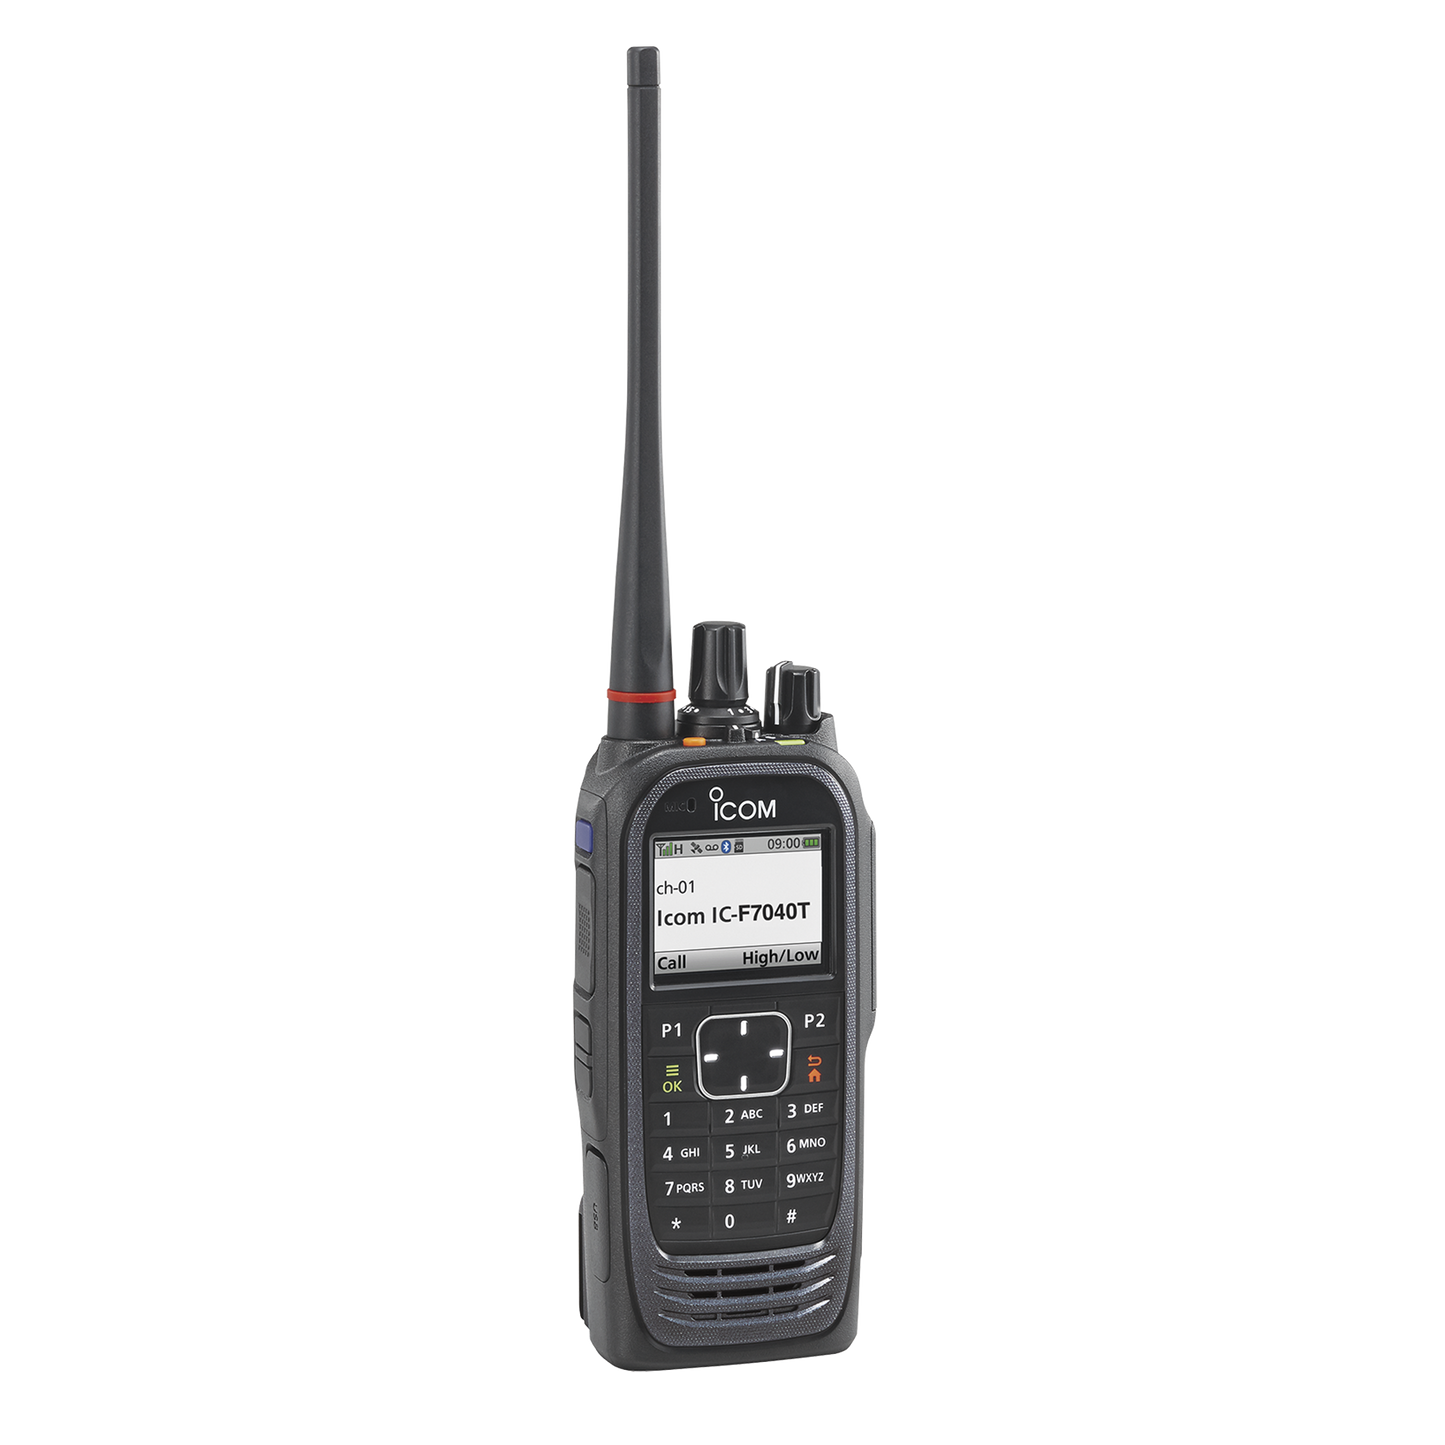 Portable UHF 10-key type Radio, 3W, 700-800MHz, 1024 Channels, Sumbmersible IP68. Compatible with P25 Conventional and Trunking.